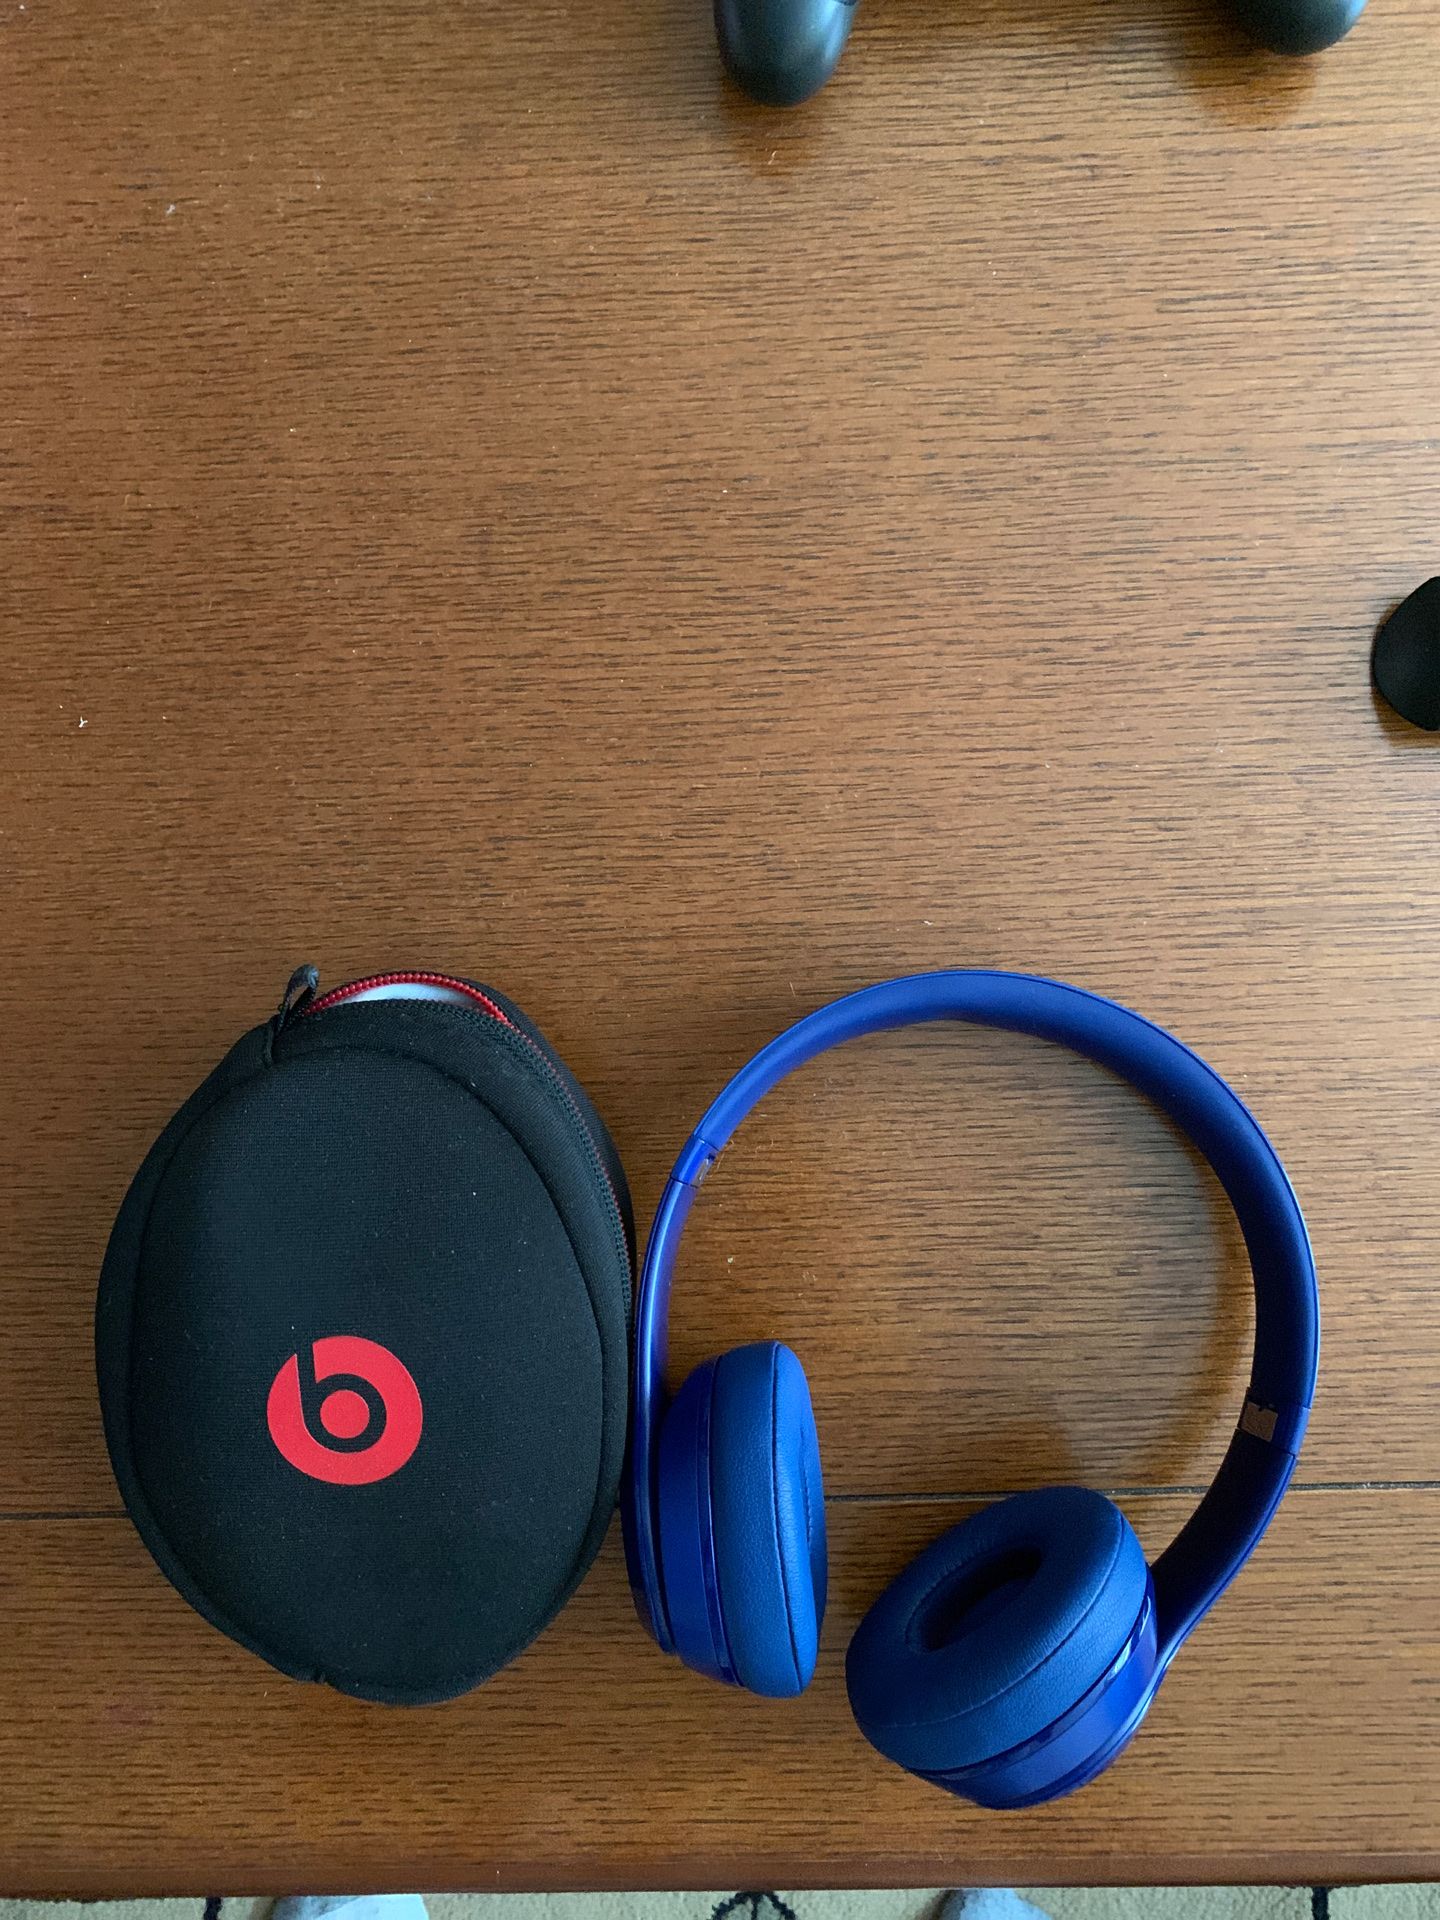 Beats solo 2 wireless. Great shape. With case.